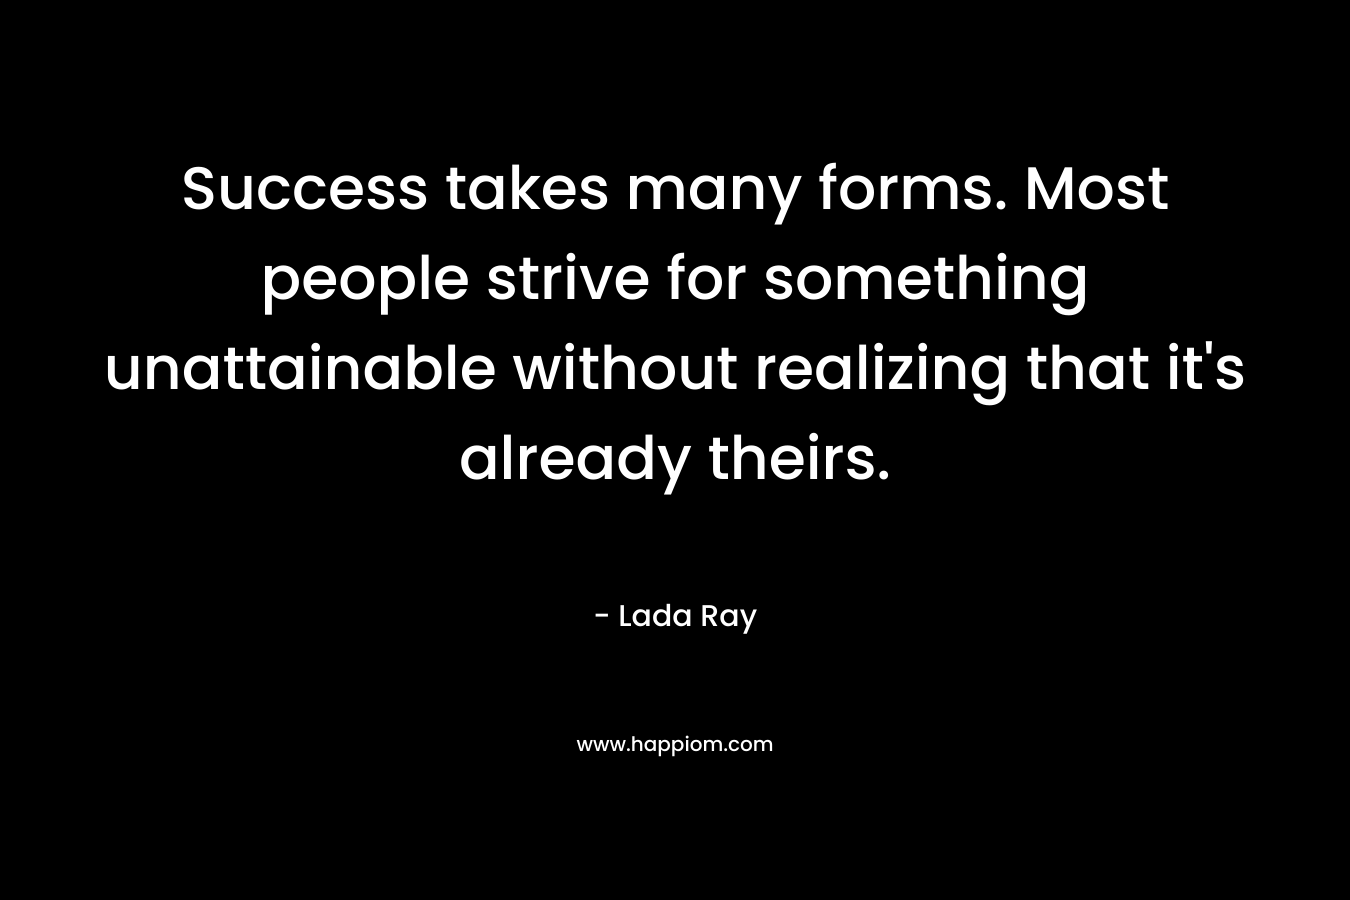 Success takes many forms. Most people strive for something unattainable without realizing that it’s already theirs. – Lada Ray